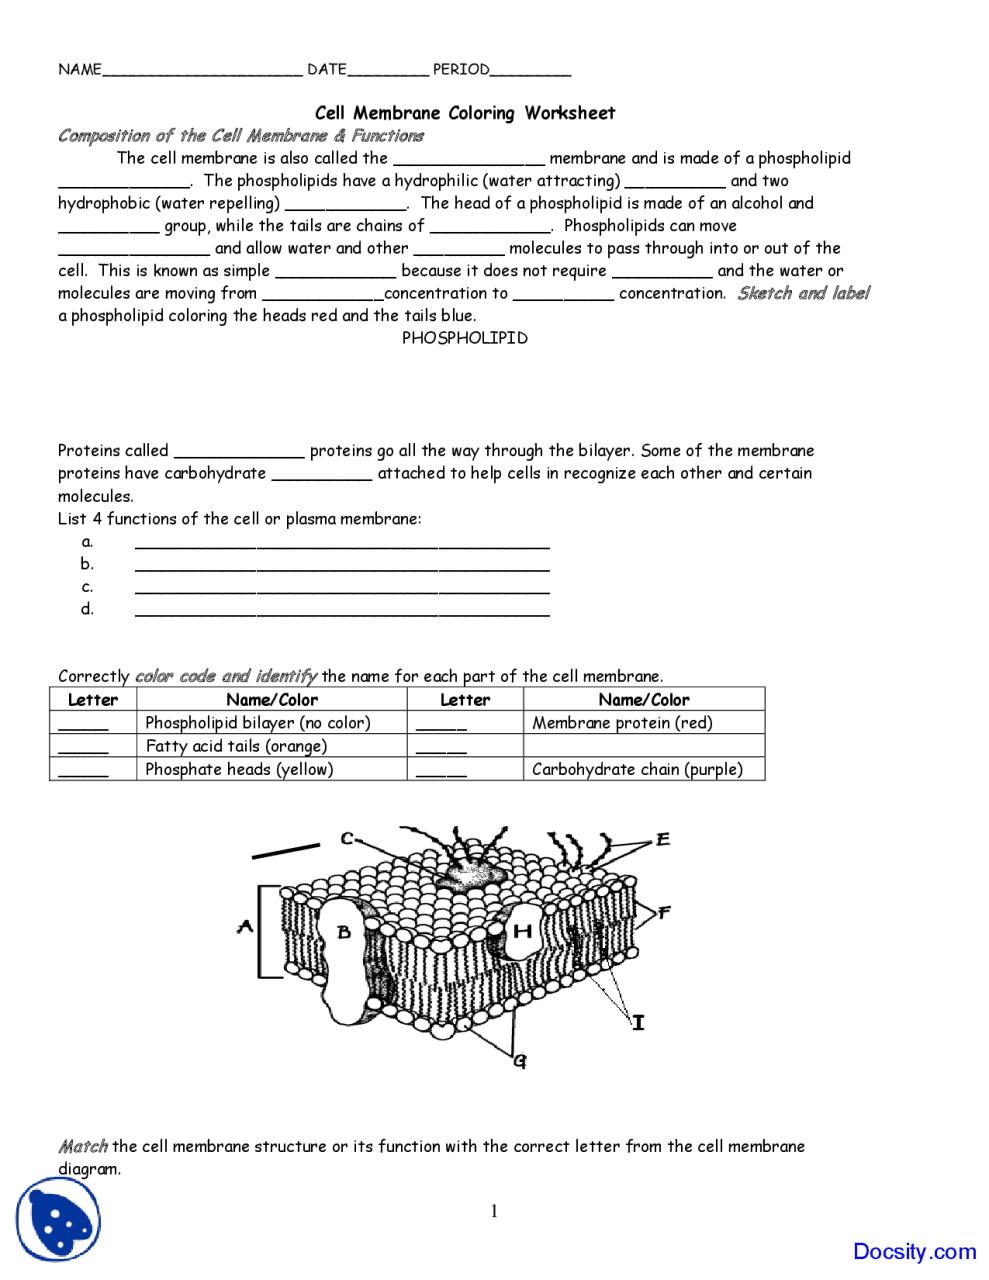 Famous Cell Membrane Coloring Worksheet Biology Ideas